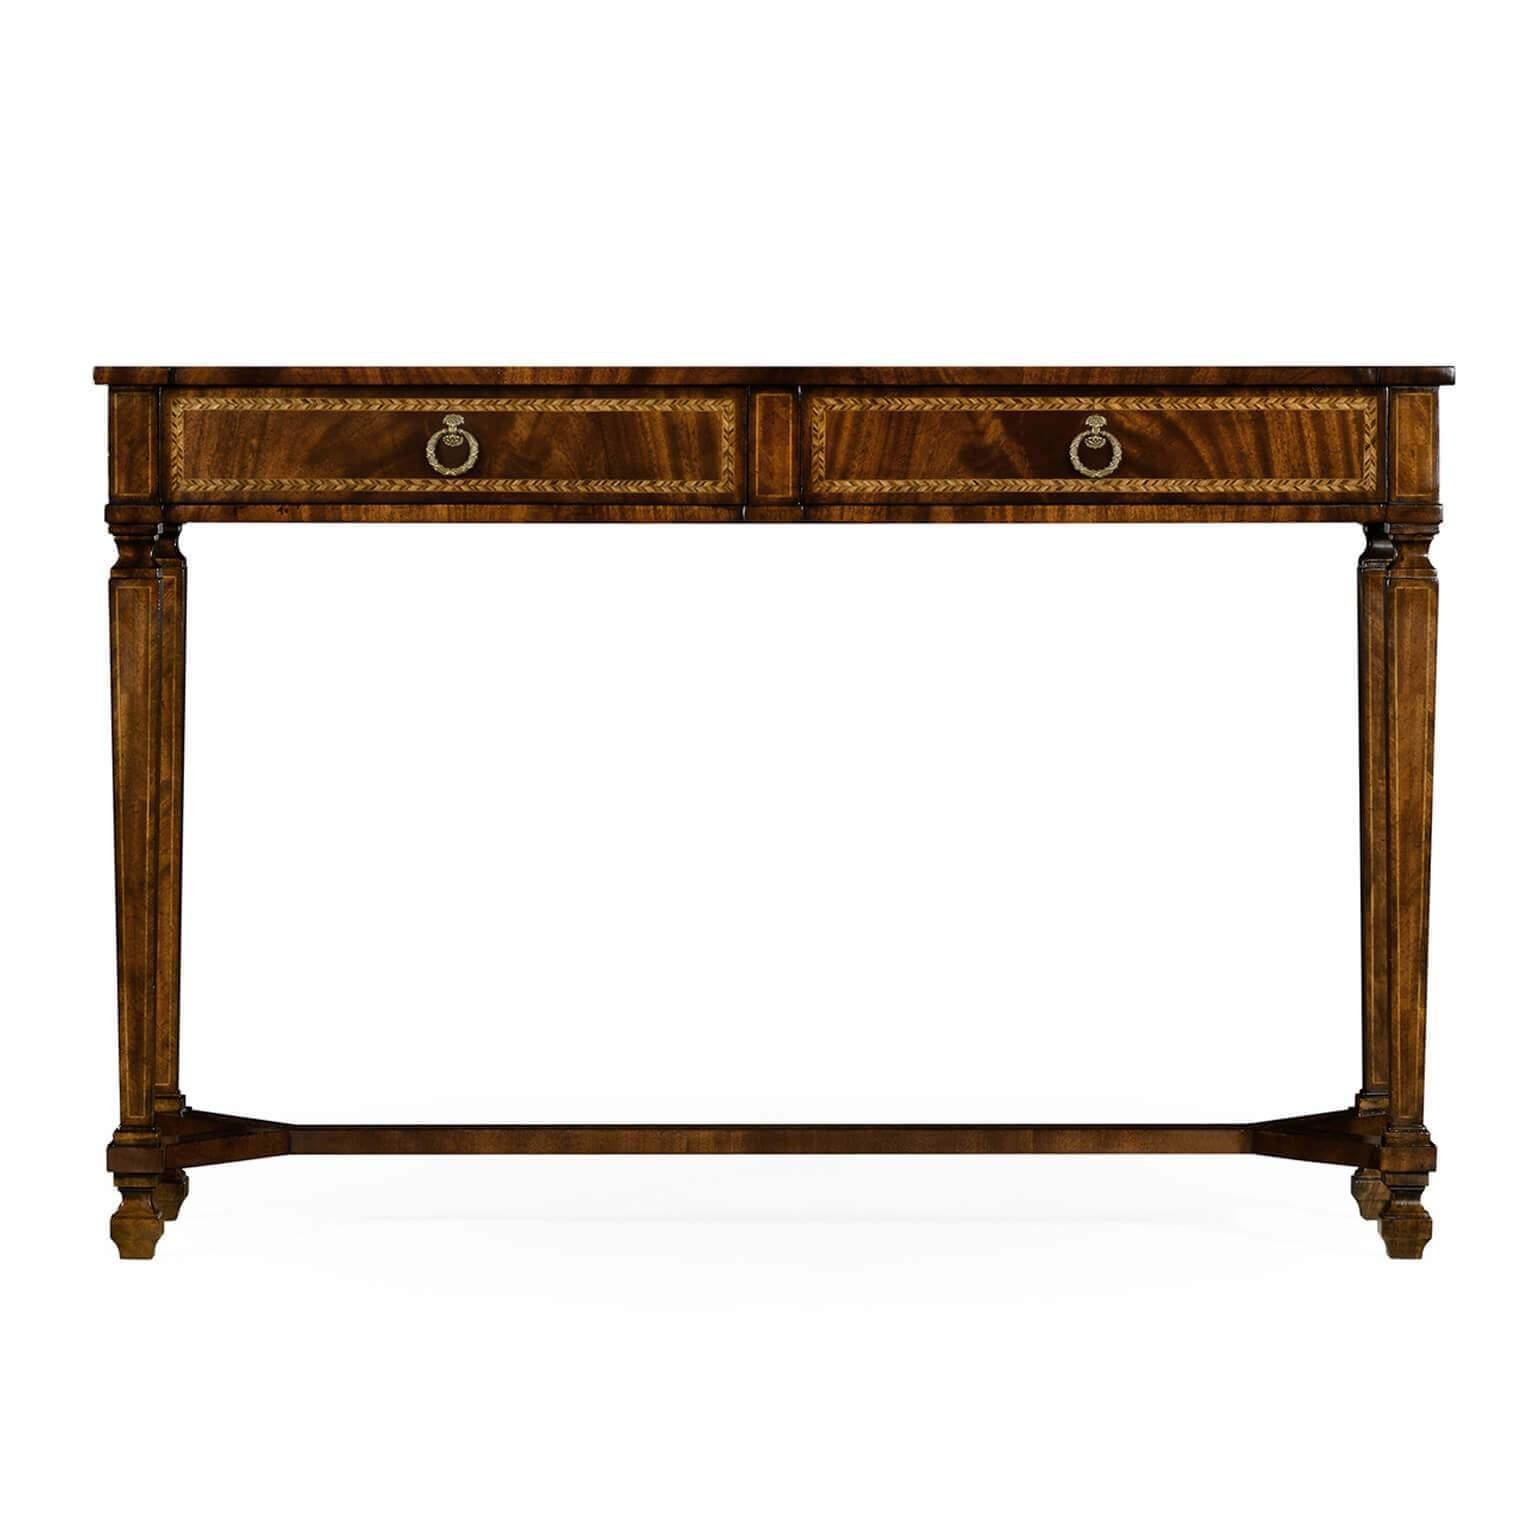 French Empire style mahogany veneered console table with two drawers. Fine geometric herringbone inlays throughout and raised on tapering square legs and a Y-frame stretcher.

Dimensions: 54